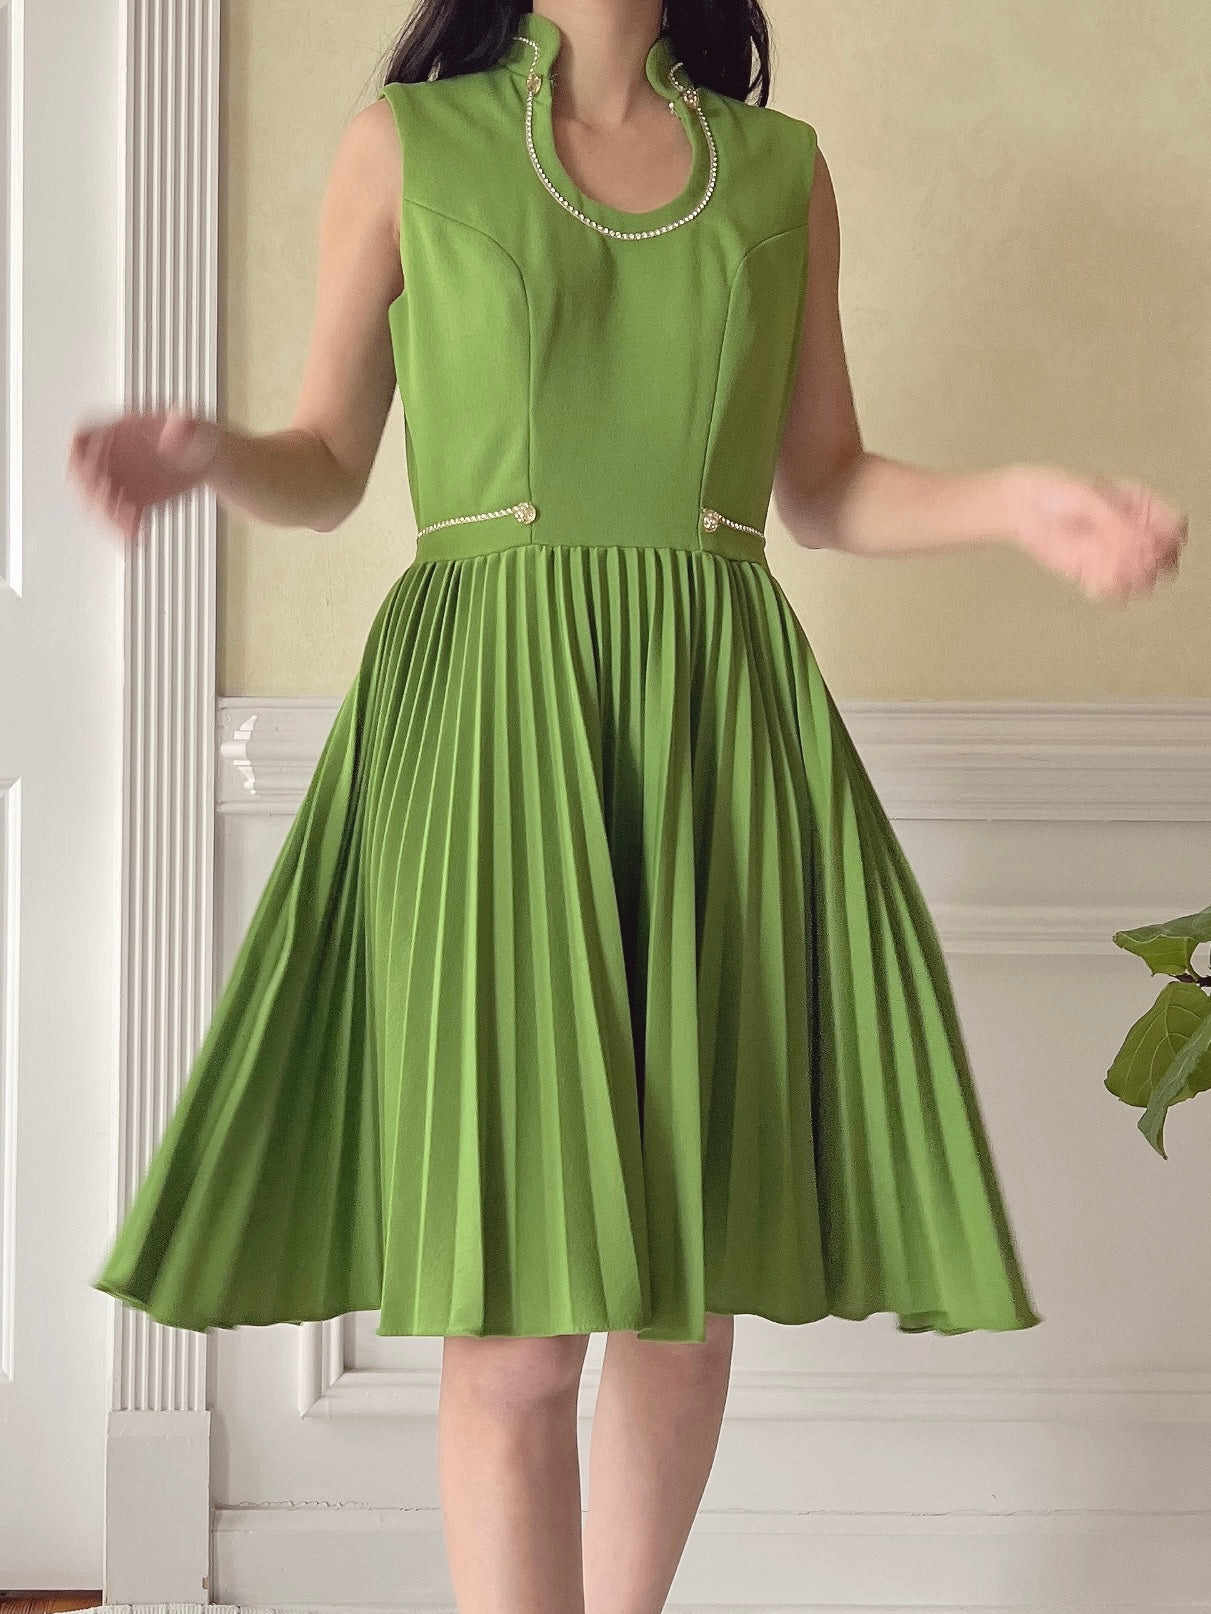 Vintage Green Rayon Pleated Dress - S